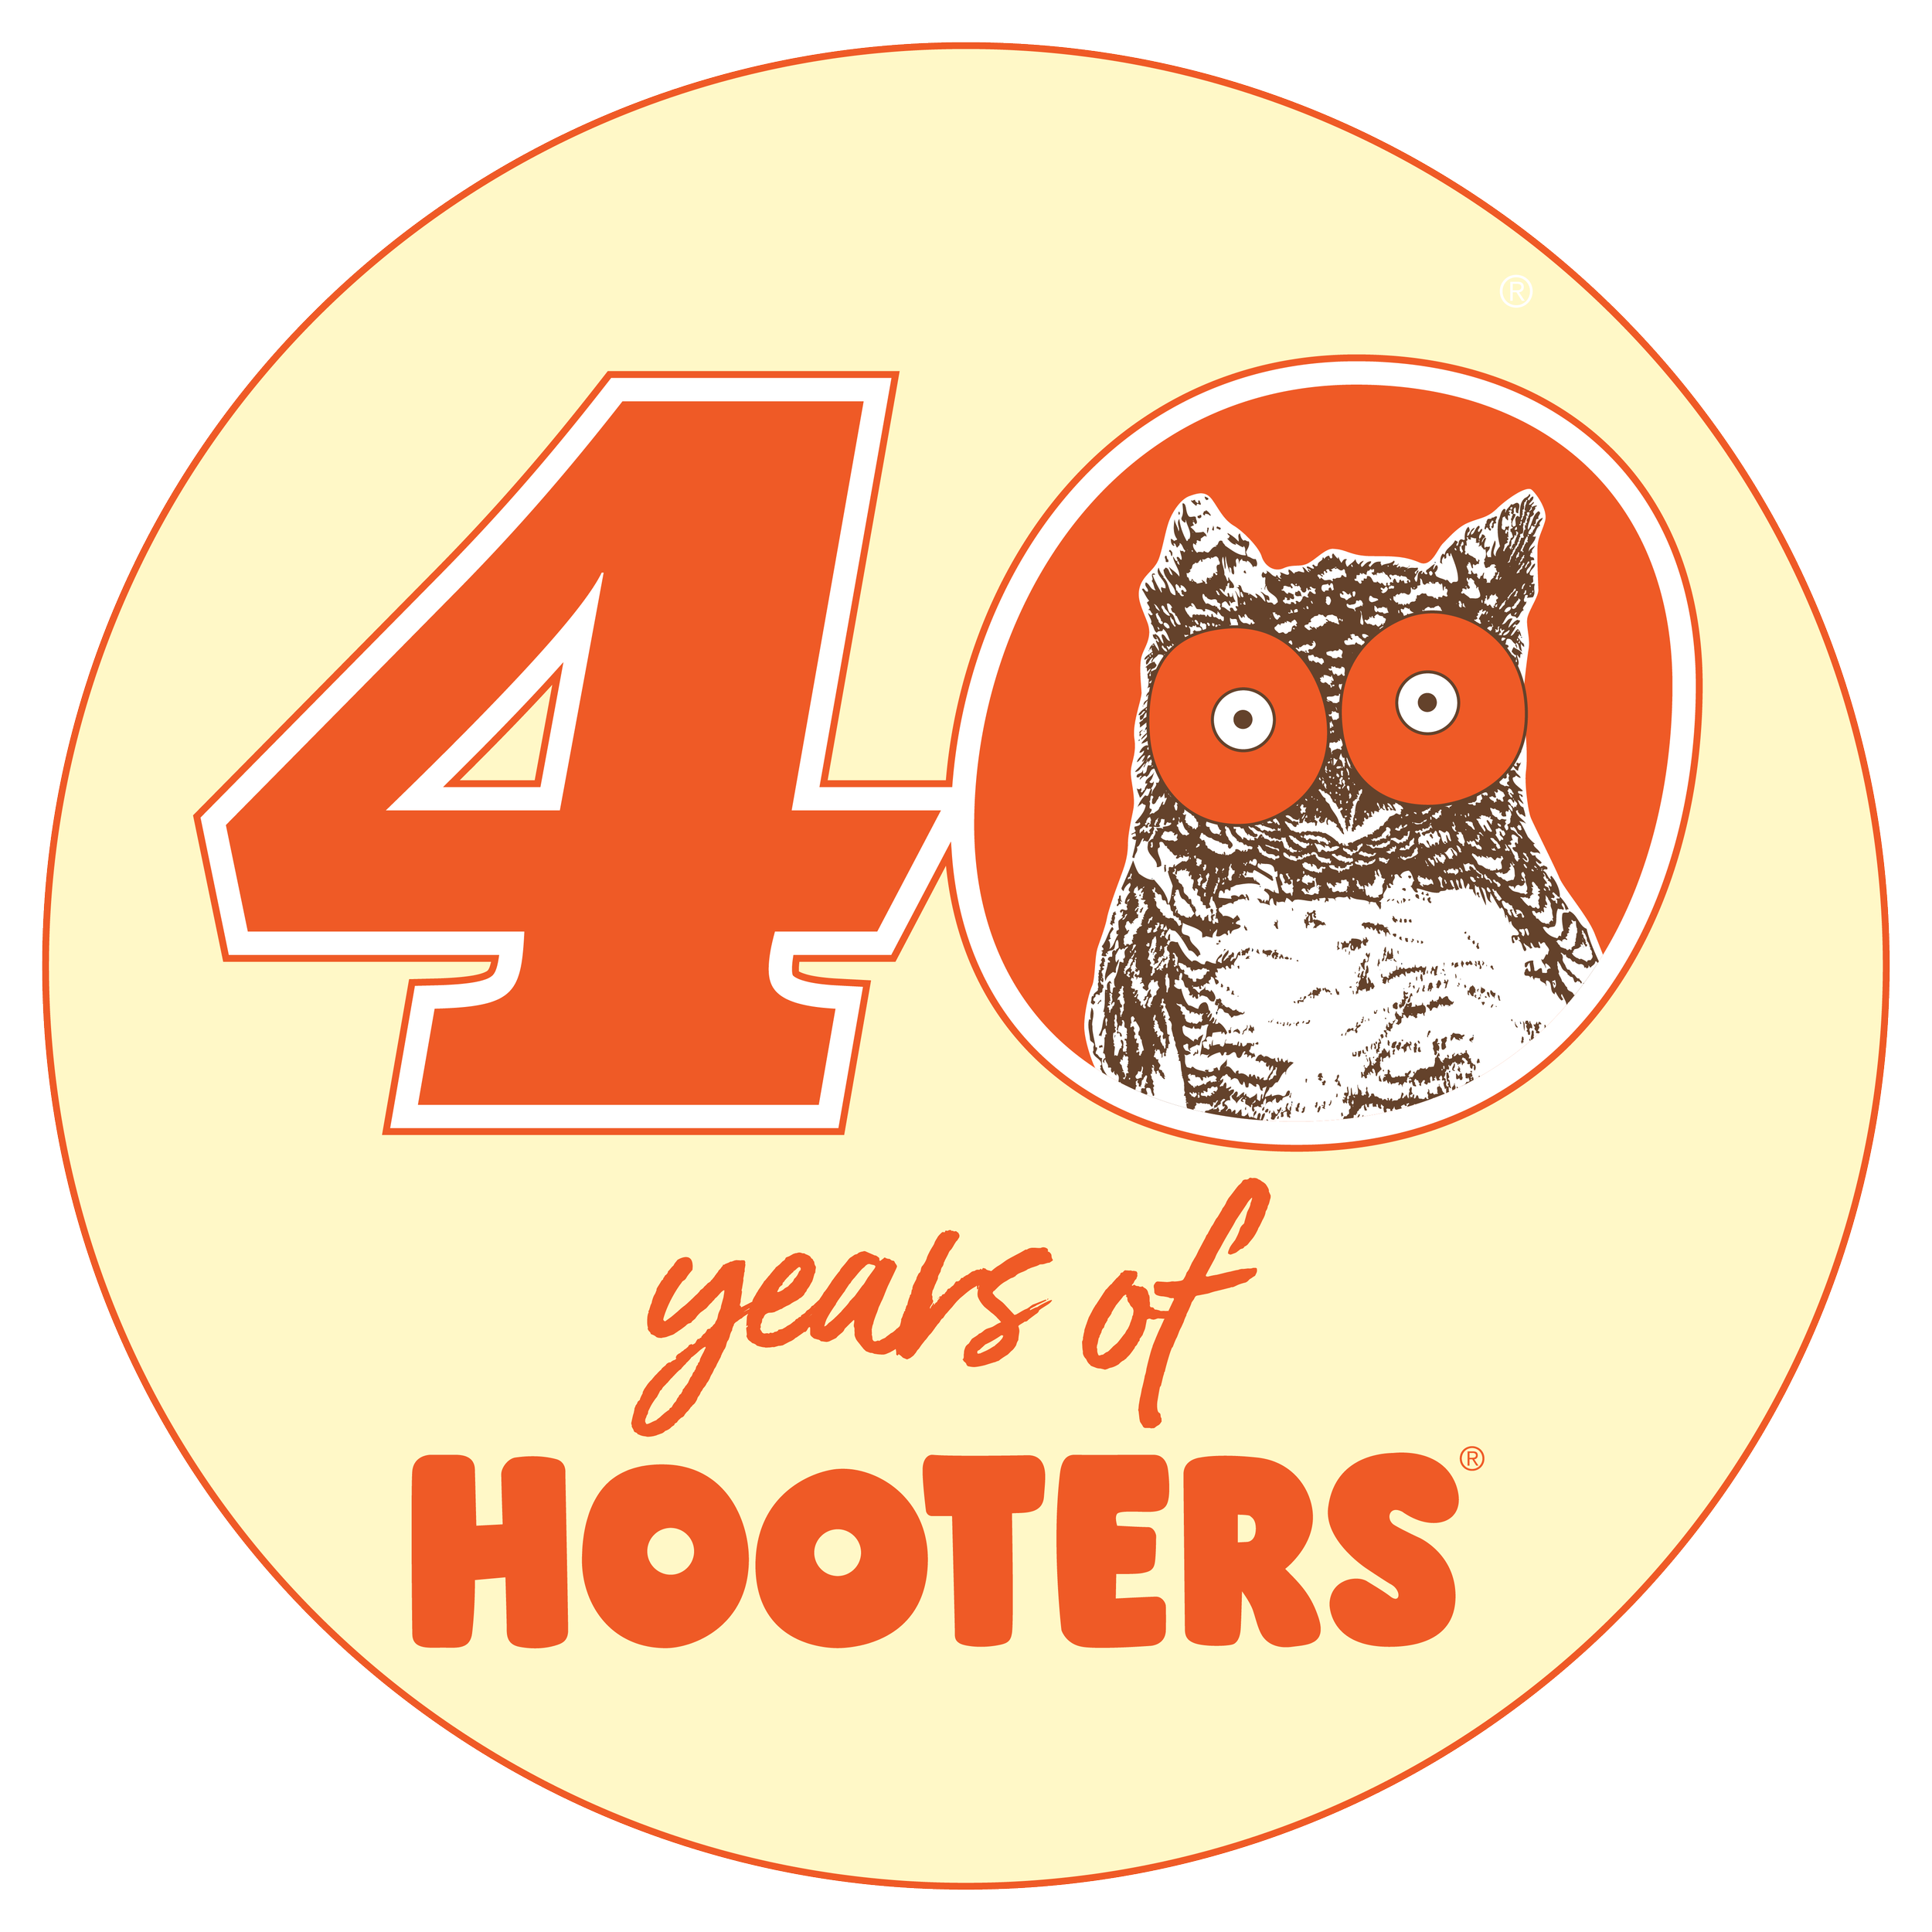 Hooters - 40th Anniversary